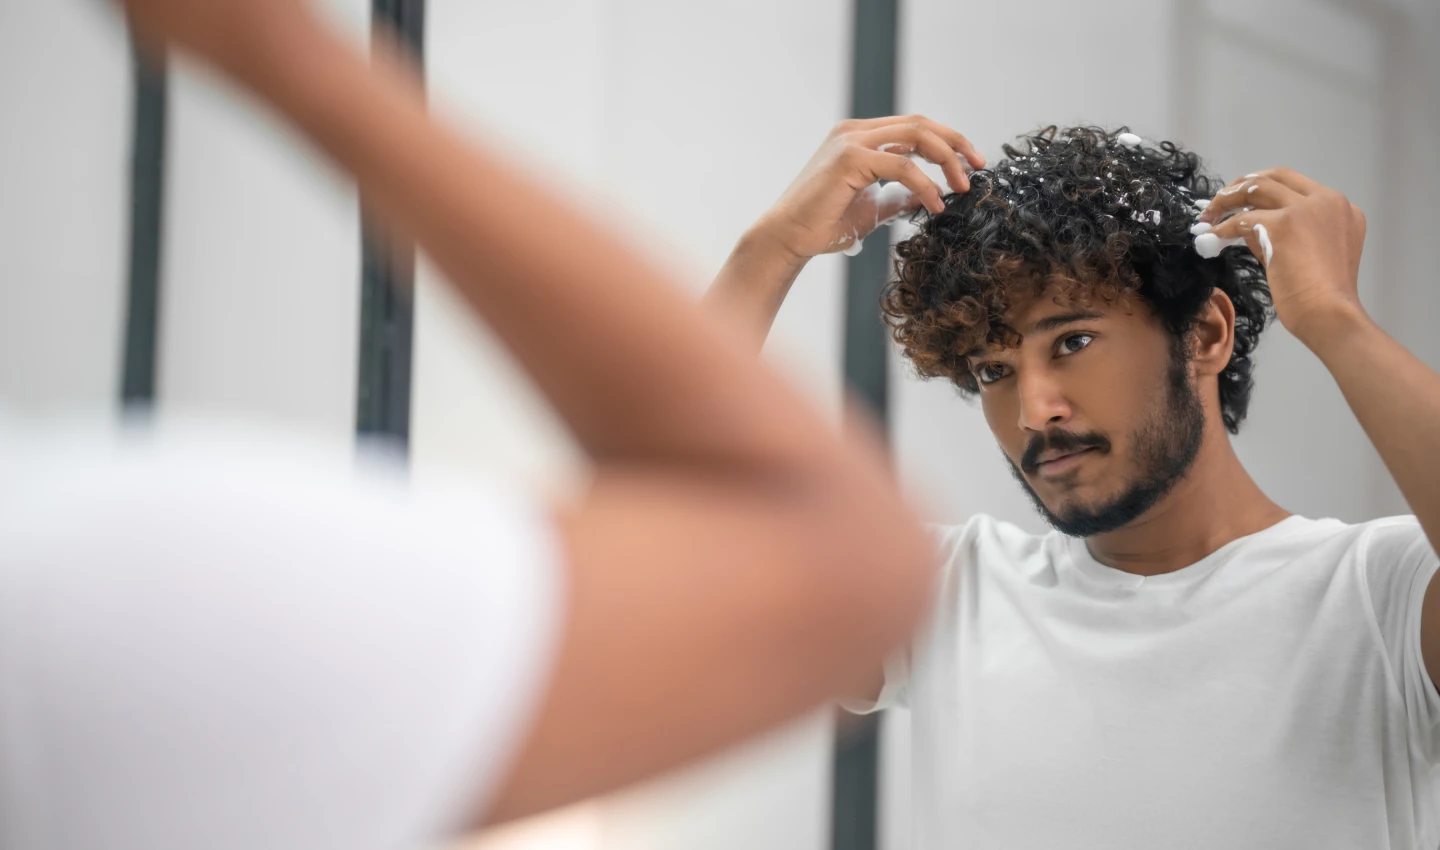 Curly Hair Shampoo Men - Image of curly-haired handsome young Indian guy styling his hair